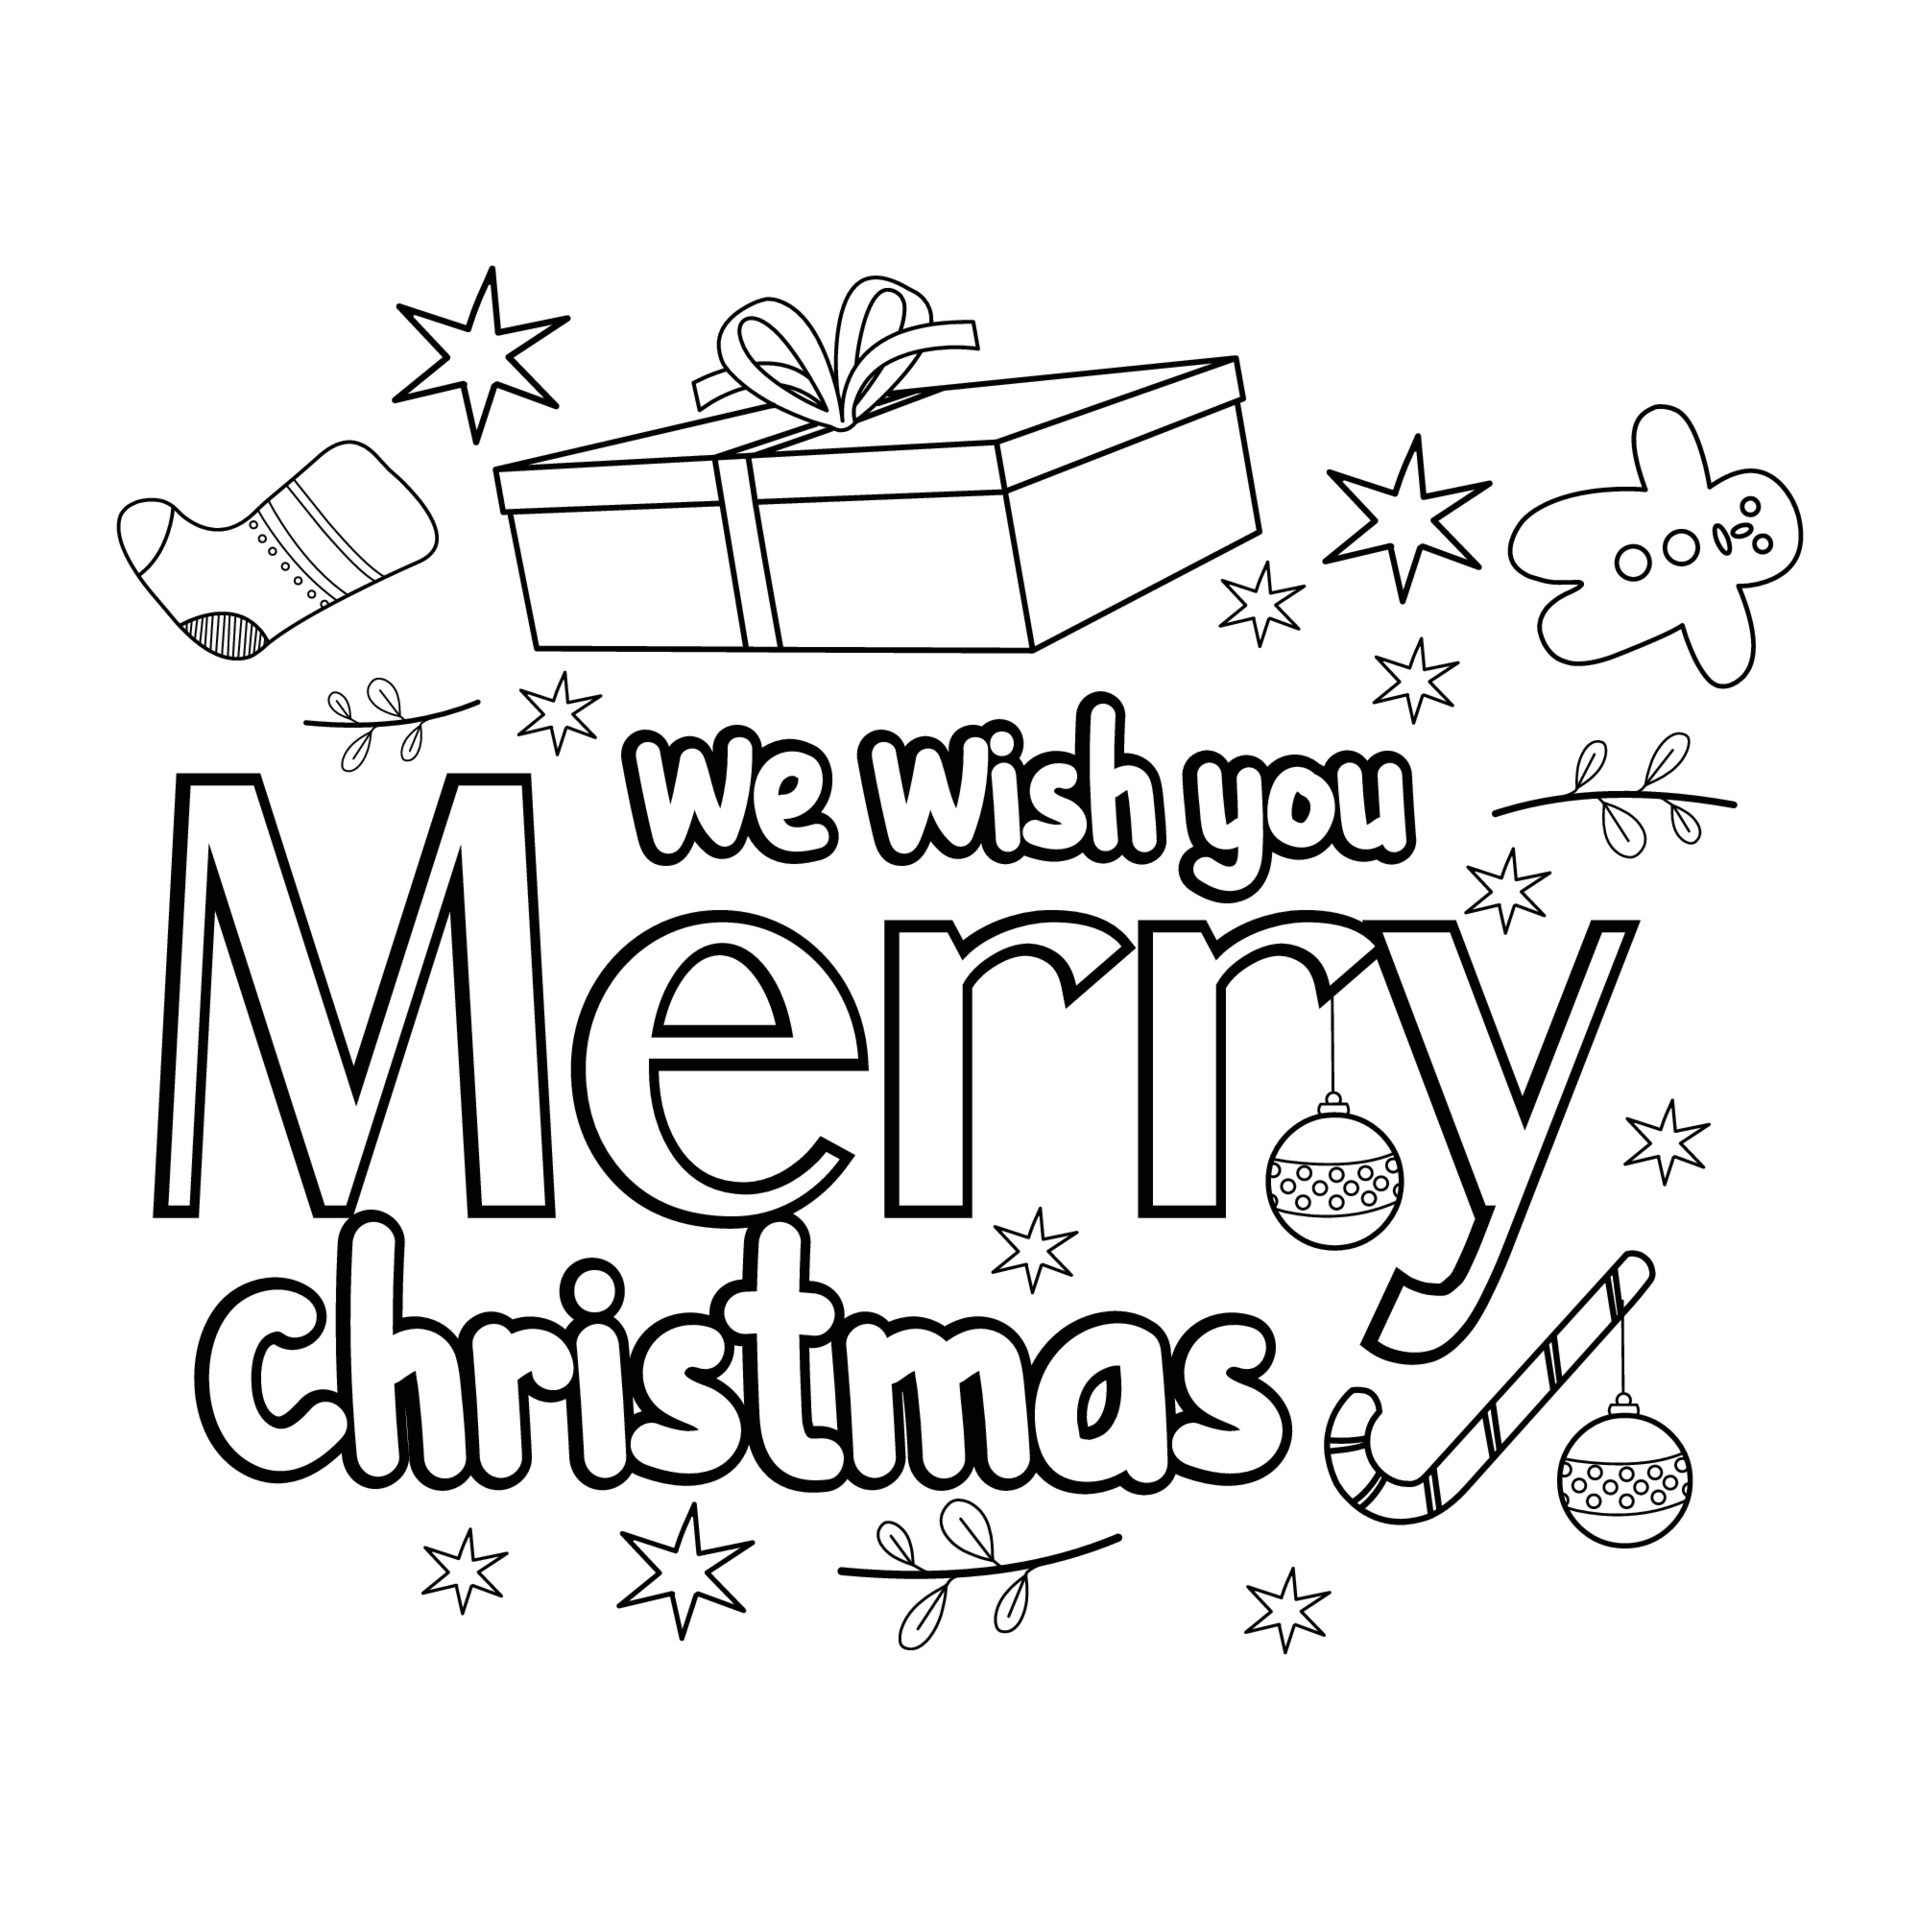 merry-christmas-coloring-page-christmas-line-art-coloring-page-design